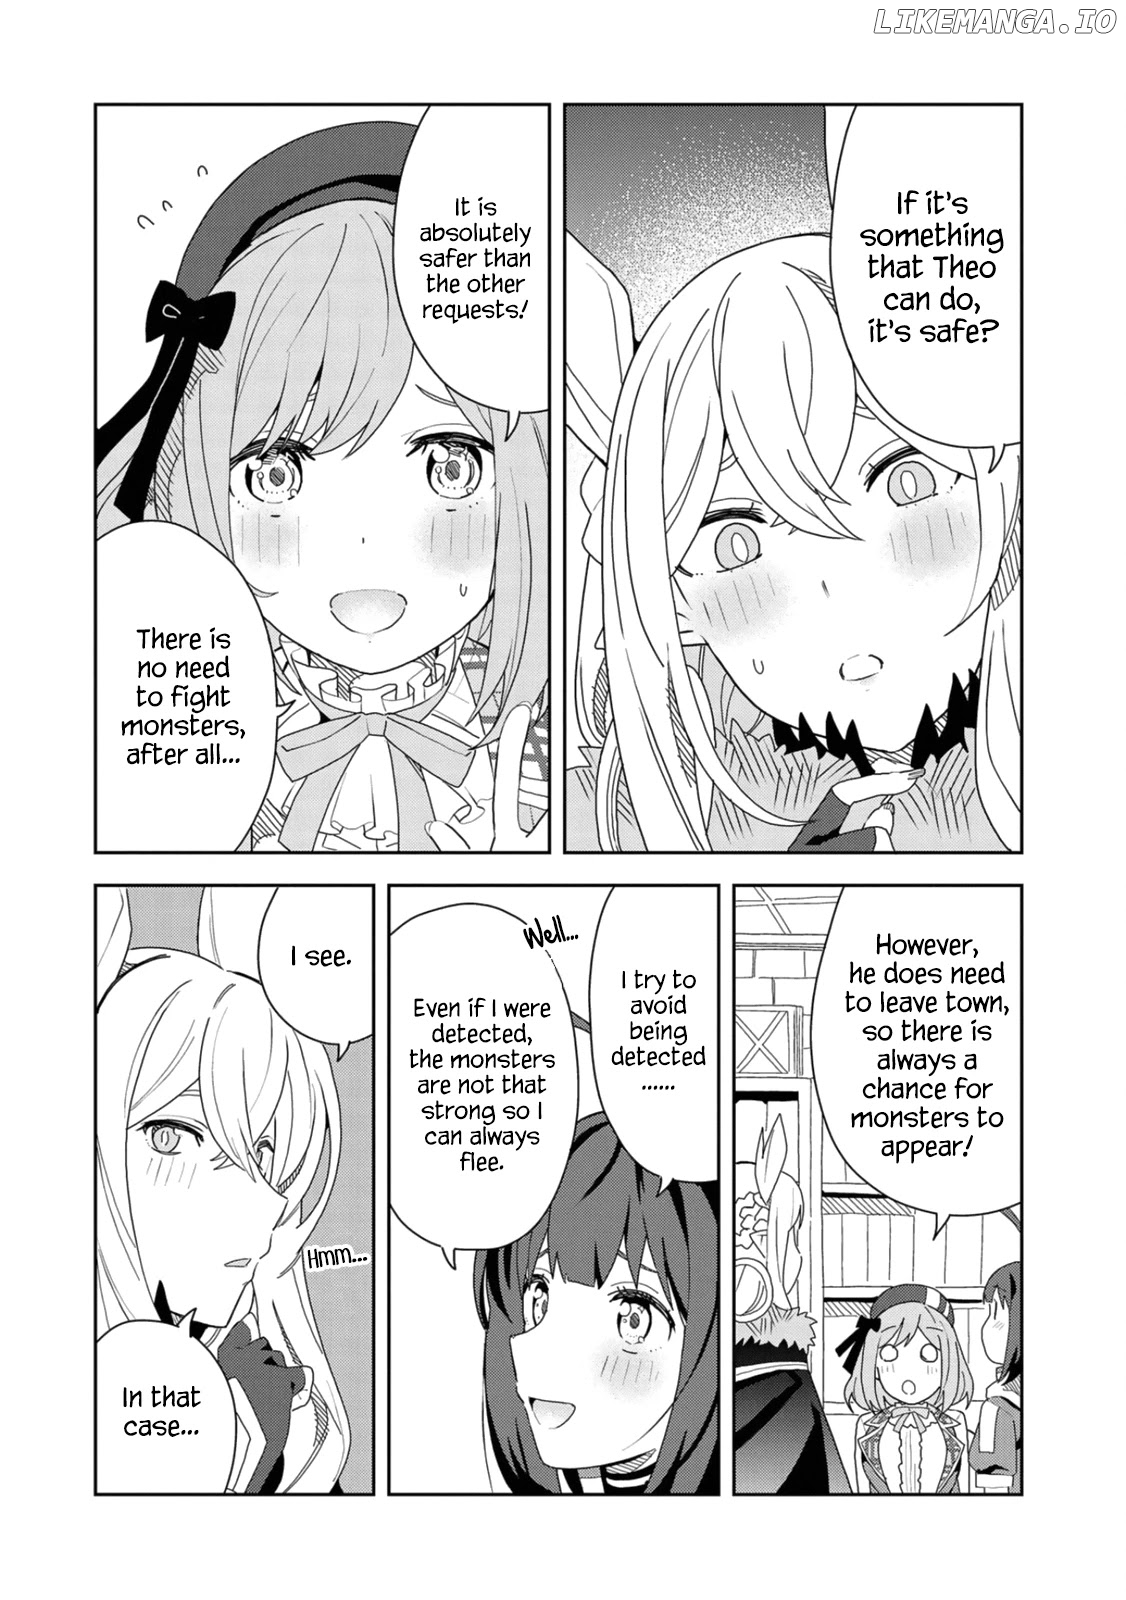 I Summoned The Devil To Grant Me a Wish, But I Married Her Instead Since She Was Adorable ~My New Devil Wife~ chapter 12 - page 8